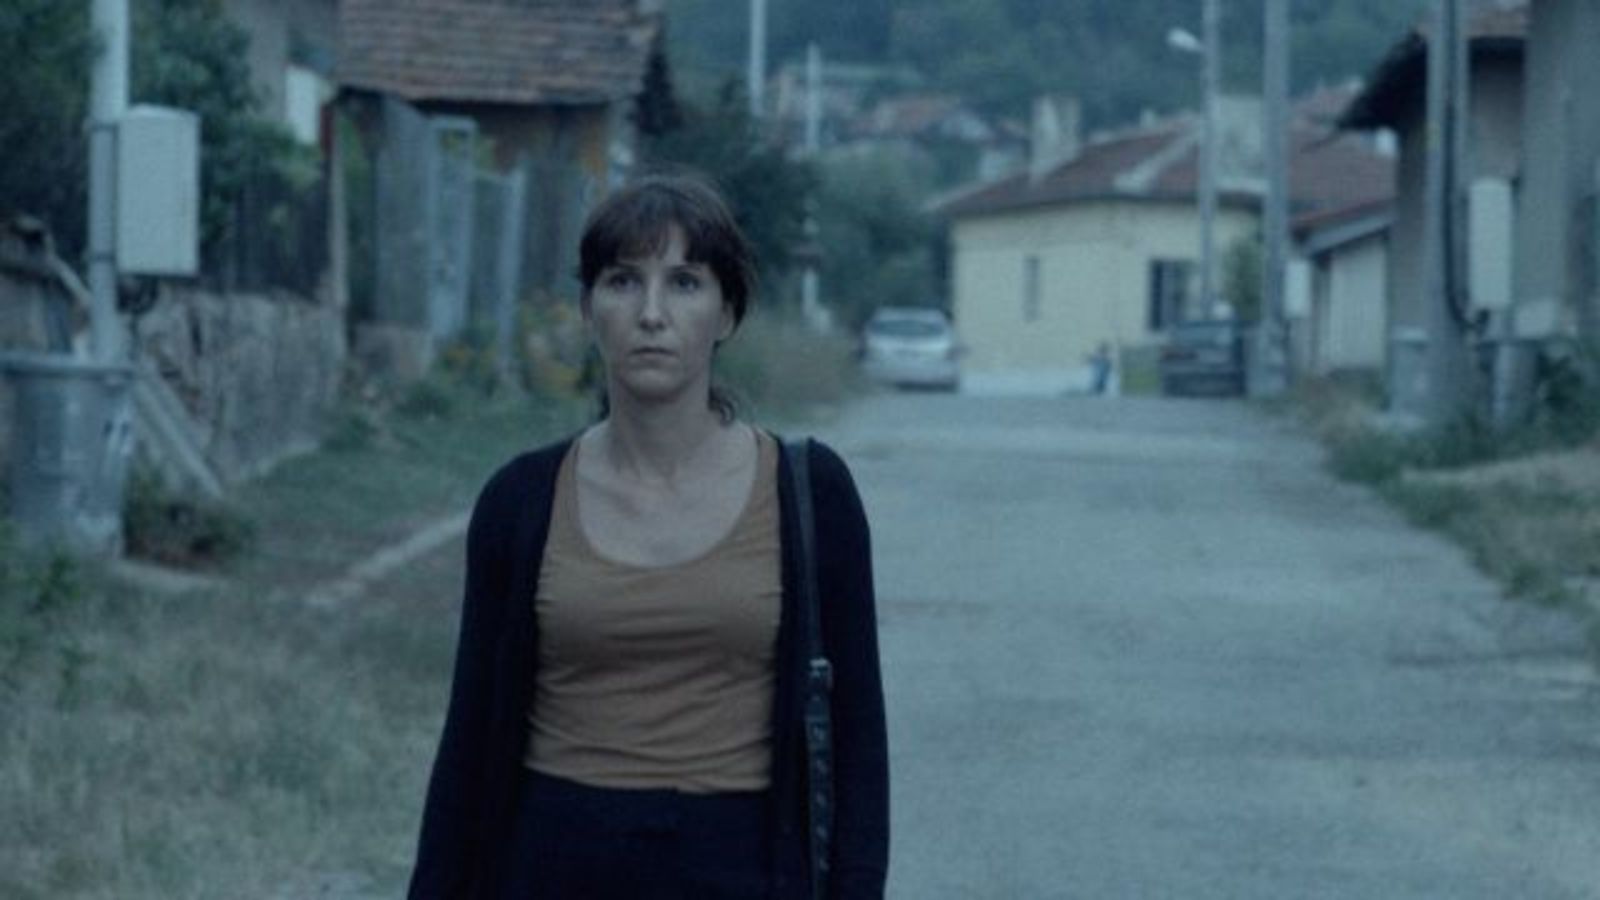 The Bulgarian Film "The Lesson" Was Given An Ingmar Bergman Award For Debut Work